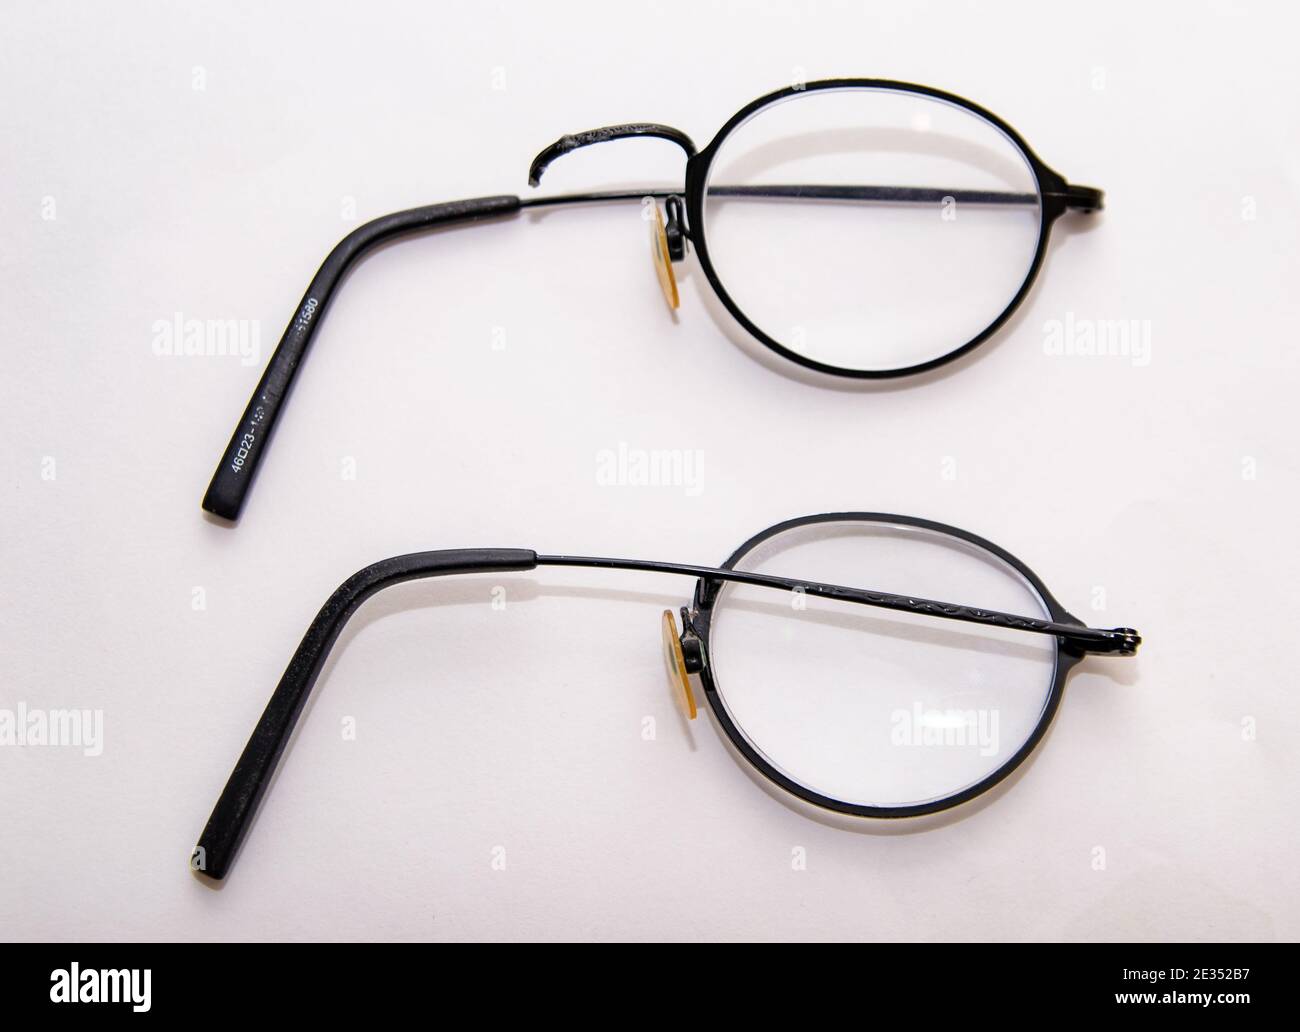 Broken glasses upon a white background. Thin round spectacles snapped at the bridge. Stock Photo